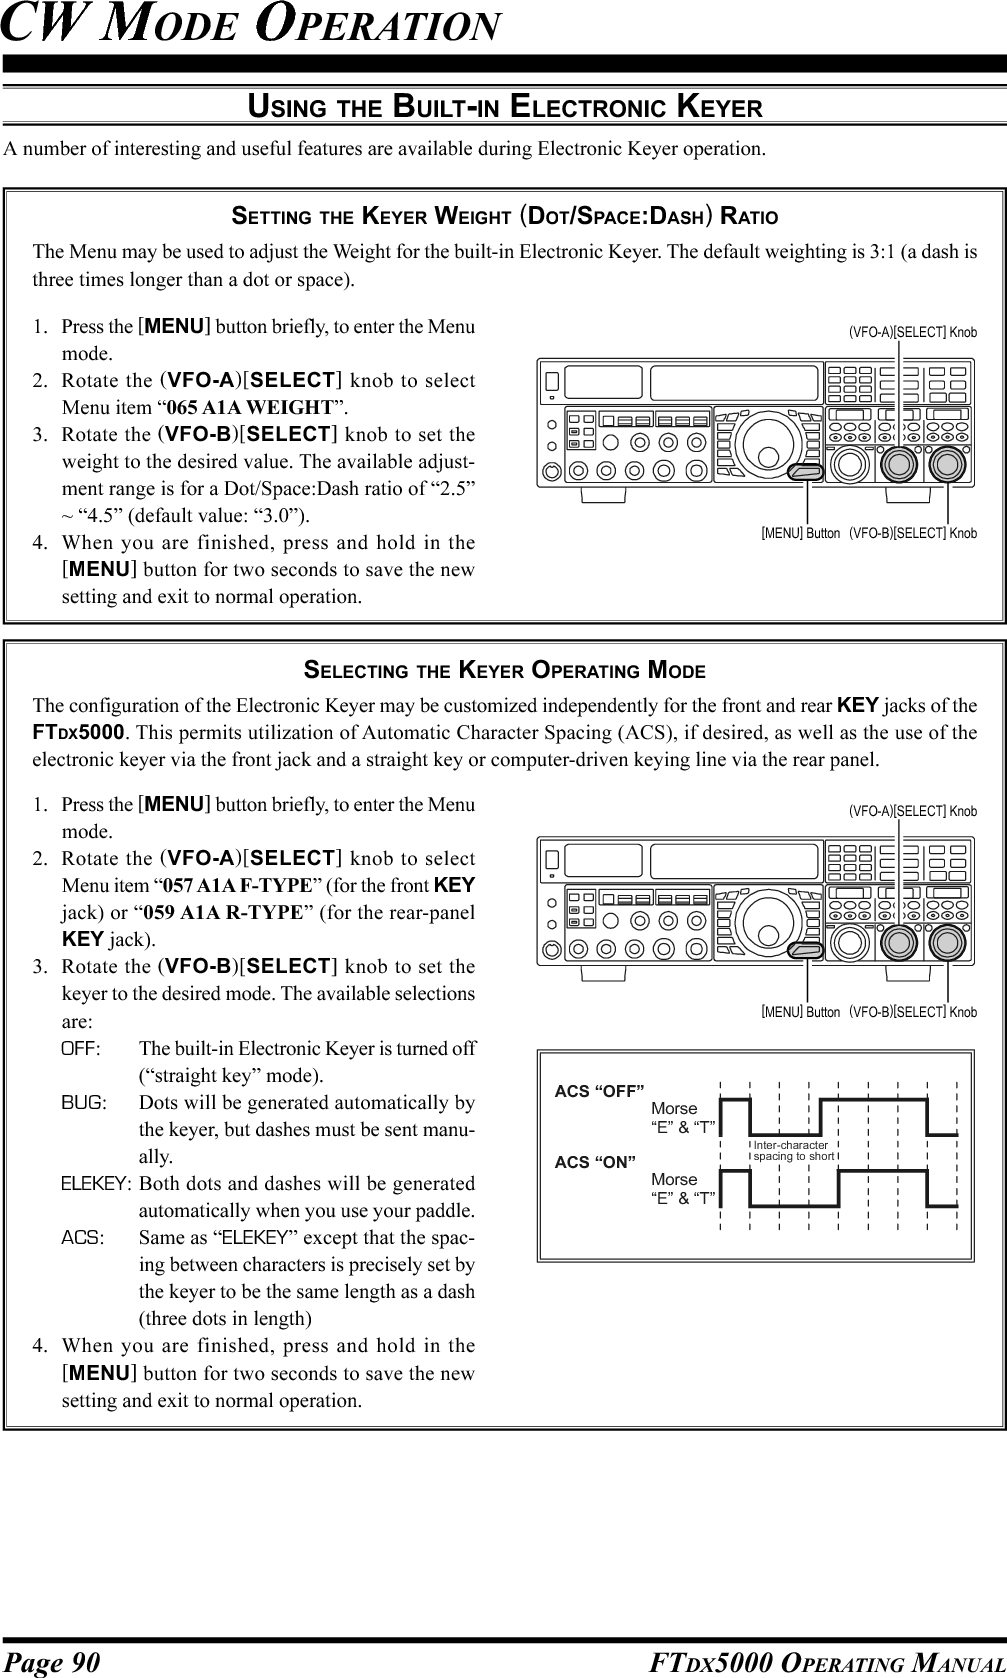 Page 91FTDX5000 OPERATING MANUALCW CONVENIENCE FEATURESCW SPOTTING (ZERO-BEATING)“Spotting” (zeroing in on another CW station) is a handy technique for ensuring that you and the other station are preciselyon the same frequency.For everyday operation, the (CW) [PITCH] knob allows you to set the center of the receiver passband, as well as the offsetpitch of your CW carrier signal, to the tone pitch you prefer to listen to.The Tuning Offset Indicator in the display may also be moved so you can adjust your receiver frequency to center theincoming station on the pitch corresponding to that of your transmitted signal.Using the SPOT SystemWhile pressing the front panel [SPOT] button, the spottone will be heard in the speaker, and the spot tone fre-quency will show in the lower right corner of the MainDisplay. This tone corresponds to the pitch of your trans-mitted signal, and if you adjust the receiver frequency tomatch the pitch of the received CW signal to that of thespot tone, your transmitted signal will be precisely matchedto that of the other station.Release the [SPOT] button to turn the spot tone off.ADVICE:In a tough DX pile-up, you may actually want to usethe SPOT system to find a “gap” in the spread of call-ing stations, instead of zeroing in precisely on the laststation being worked by the DX station. From the DXside, if a dozen or more operators (also using Yaesu’sSPOT system) all call precisely on the same frequency,their dots and dashes merge into a single, long tonethat the DX station cannot decipher. In such situations,calling slightly higher or lower may get your callthrough.The Tuning Offset Indicator in the display may be uti-lized for CW frequency adjustment, as well. Its con-figuration is set via Menu item “012 DISP BAR SEL”at the factory, and the Tuning Offset Indicator is al-ready set to the “CW TUNE” selection.QUICK POINTS:The CW spotting process utilizes the spot tone or theTuning Offset Indicator, with the actual offset pitchbeing set by the [PITCH] knob on the front panel. Theoffset pitch may be set to any frequency between 300Hz and 1050 Hz, in 50 Hz steps, and you can eithermatch tones audibly (using the [SPOT] button) or alignthe receiver frequency so that the central red bar onthe Tuning Offset Indicator lights up. Note that thereare 21 “dots” on the Tuning Offset Indicator, and de-pending on the resolution selected, the incoming CWsignal may fall outside the visible range of the bar in-dicator, if you are not reasonably close to the properalignment of tones.The displayed frequency on CW, normally reflects the“zero beat” frequency of your offset carrier. That is, ifyou were to listen on USB on 14.100.70 MHz to asignal with a 700 Hz offset, the “zero beat” frequencyof that CW carrier would be 14.000.70 MHz. The lat-ter frequency is what the FTDX5000 displays, by de-fault. However, you can change the display to be iden-tical to what you would see on SSB by using Menuitem “066 A1A FRQ DISP” and setting it to “FREQ”instead of its default “PITCH” setting.[SPOT] Button[PICTH] KnobRetune:Shift to Higher Frequency: When the CW reversefeature is activated, the indica-tor of the Tuning Offset Indicator will also be reversed.Zero-InRetune:Shift to Lower Frequency